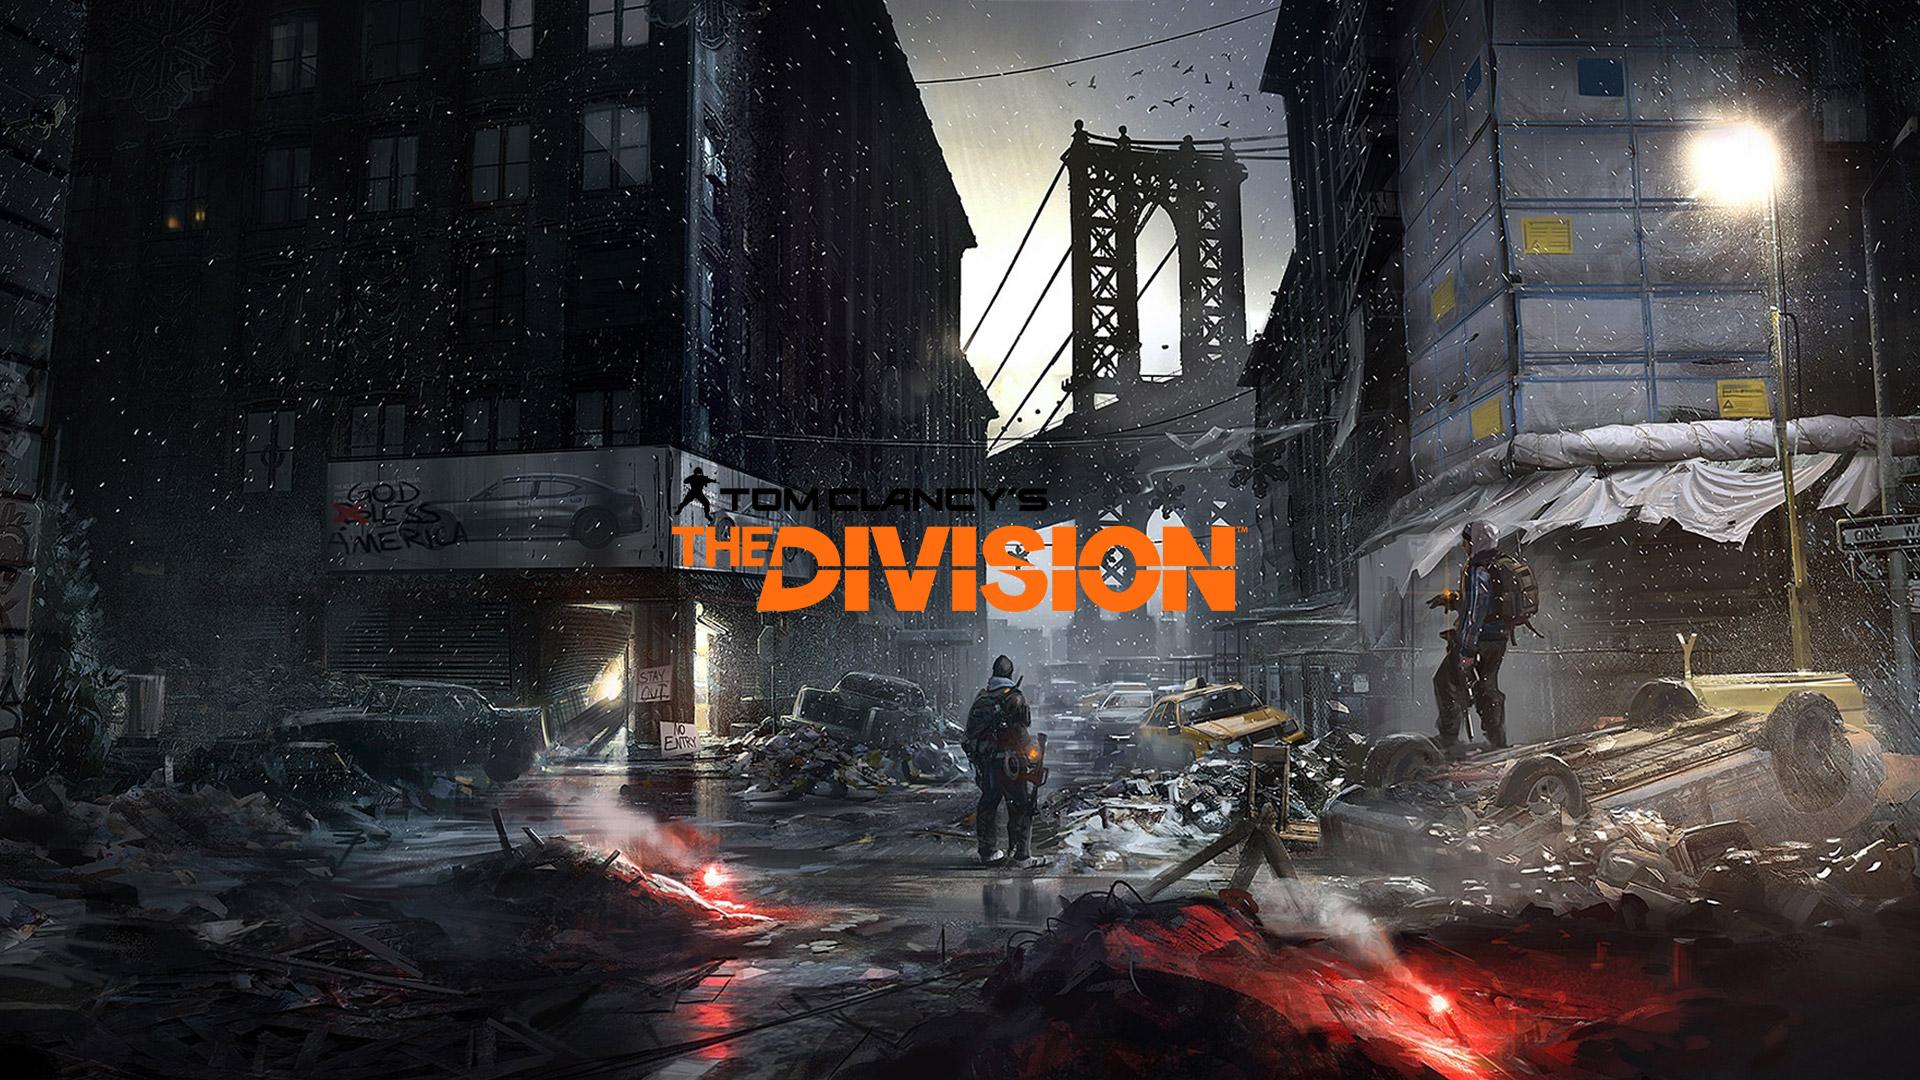 Tom Clancys The Division wallpaper 4